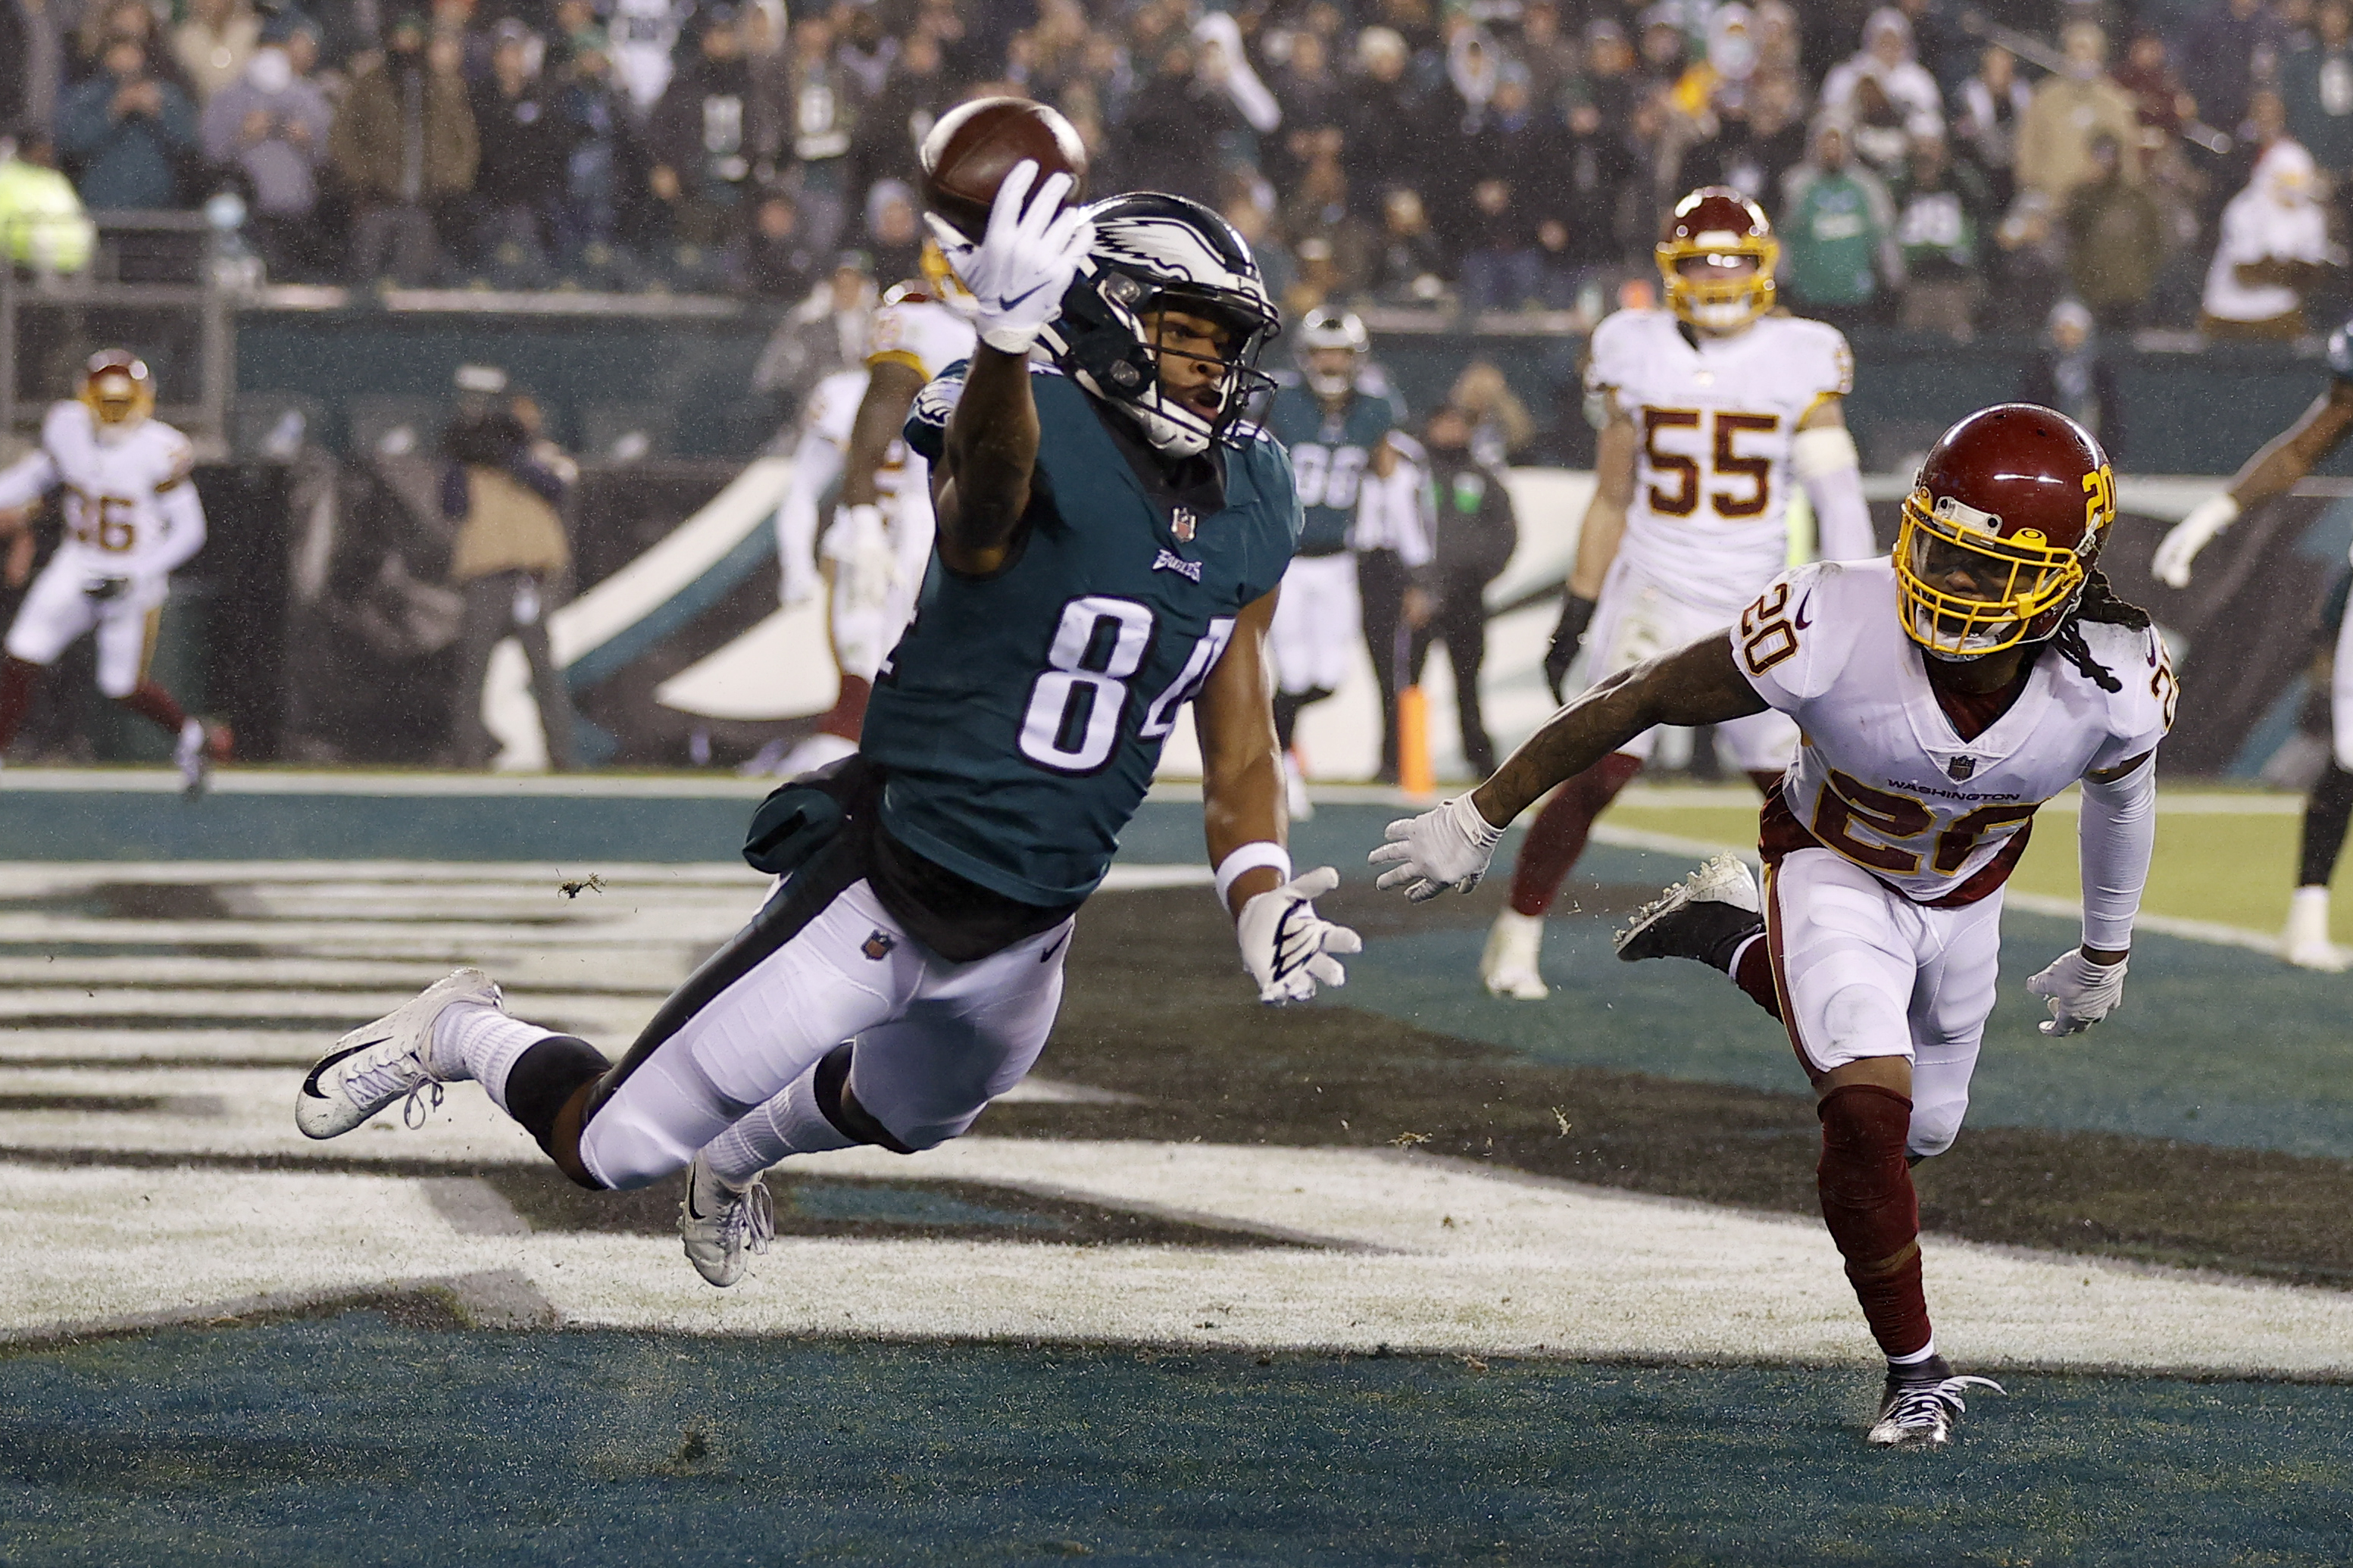 Ward gets another shot at NFL with Eagles — The Cougar